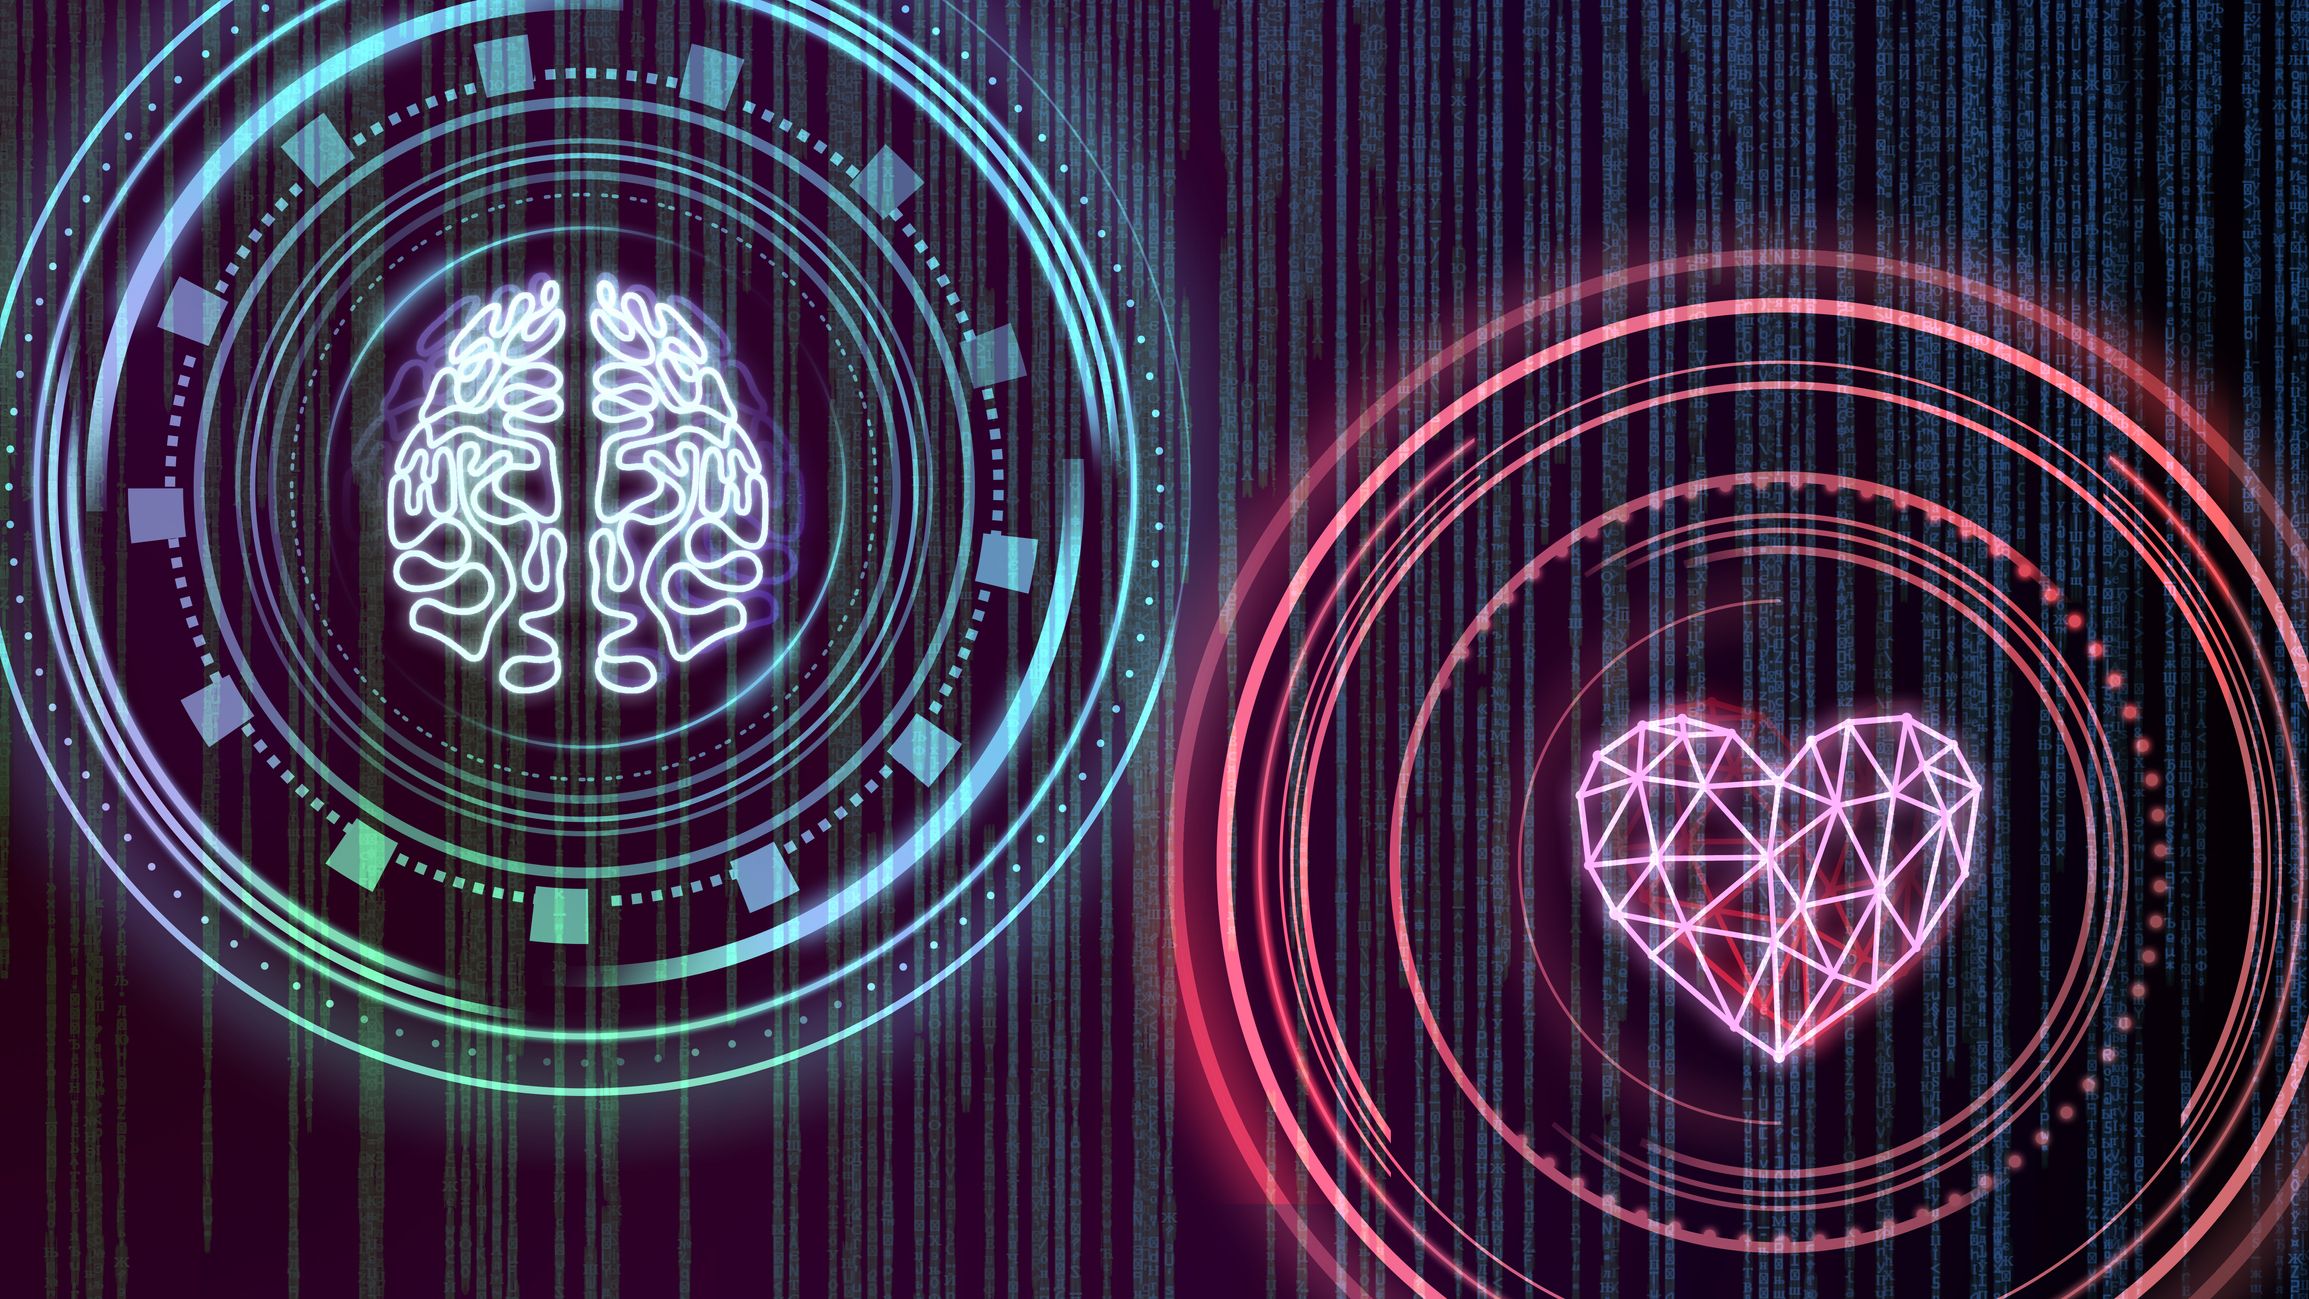 Creating new algorithms in the brain for more heart